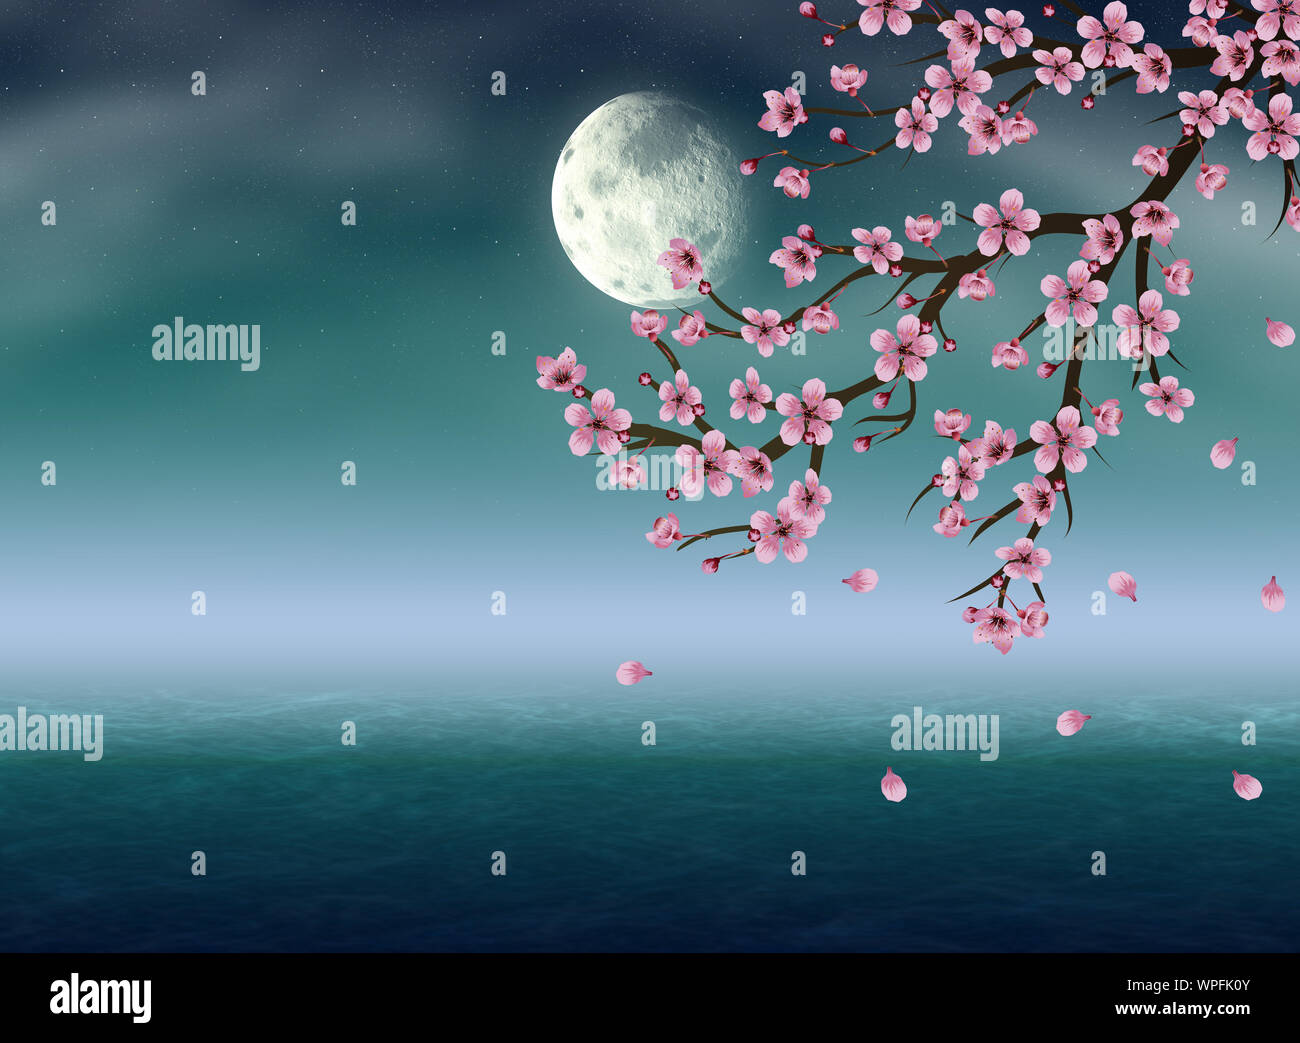 Chinese Style Moonlight Lake Water Cherry Blossom Background Wallpaper  Image For Free Download  Pngtree